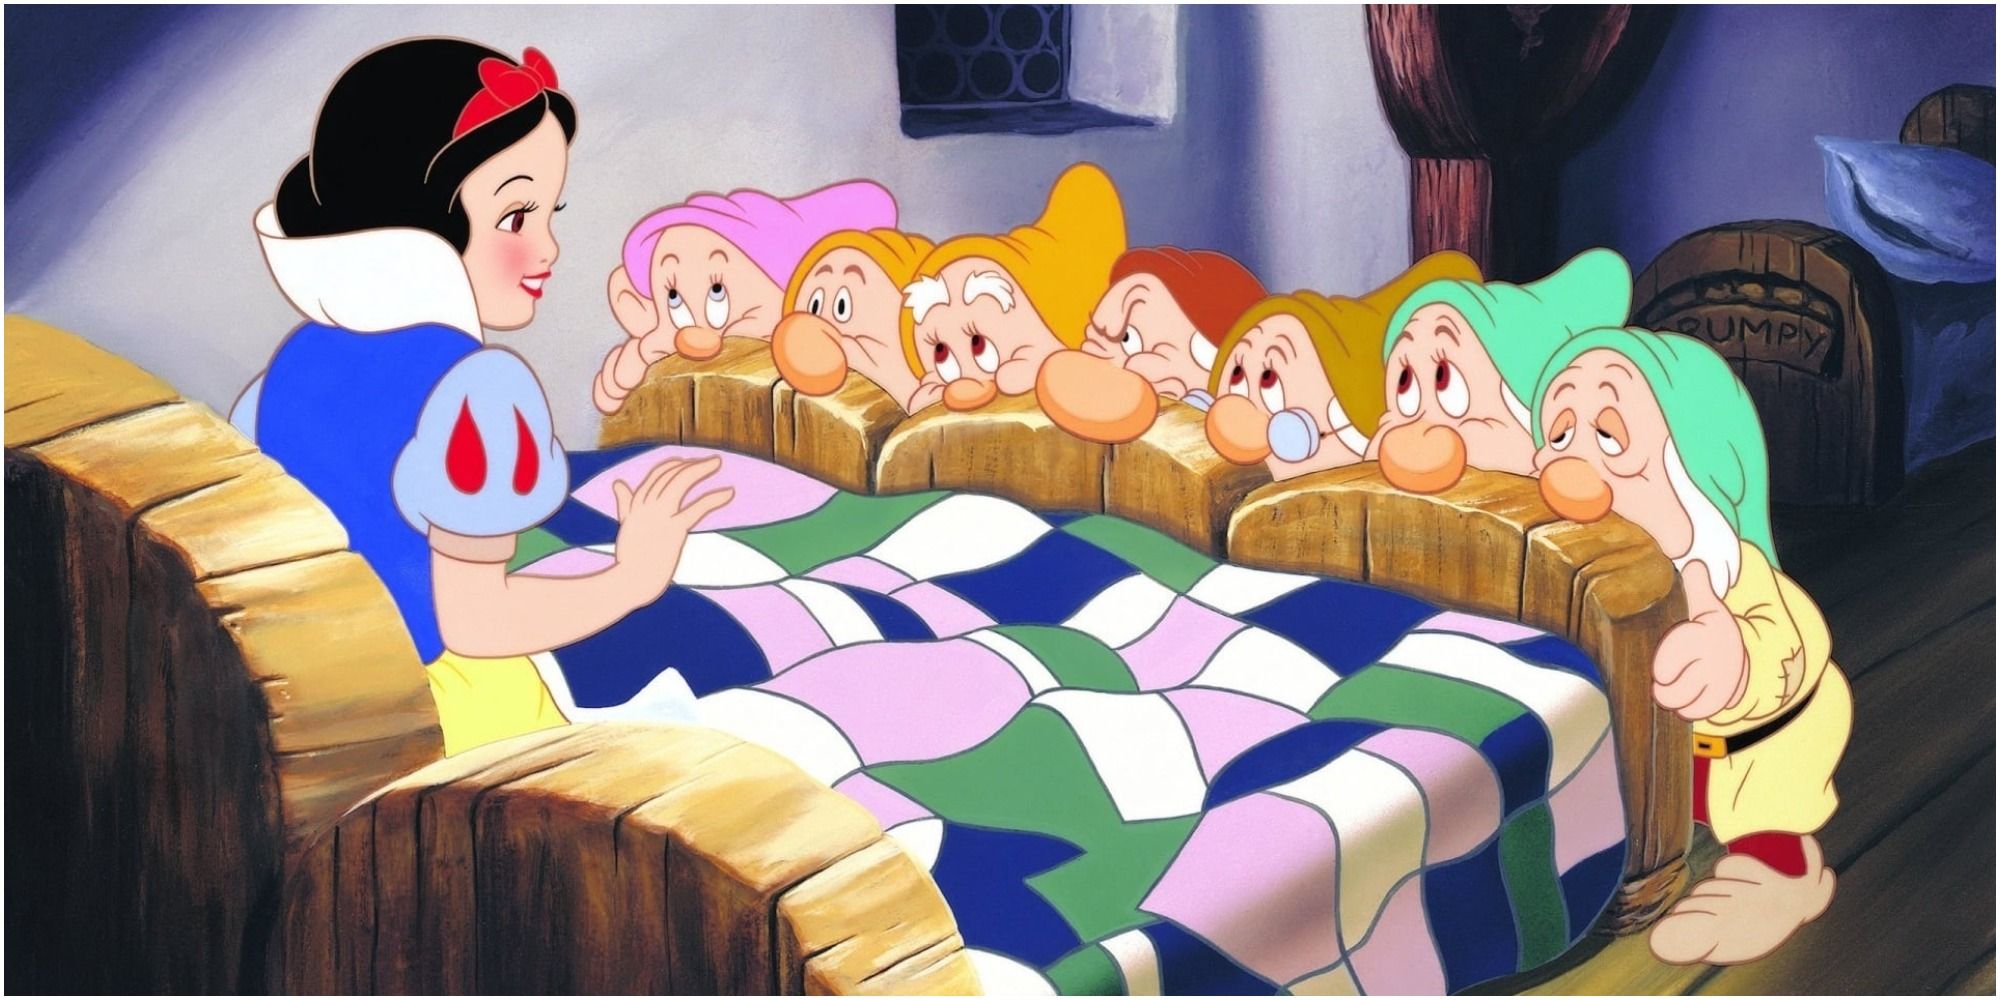 The Seven Dwarves with Snow White